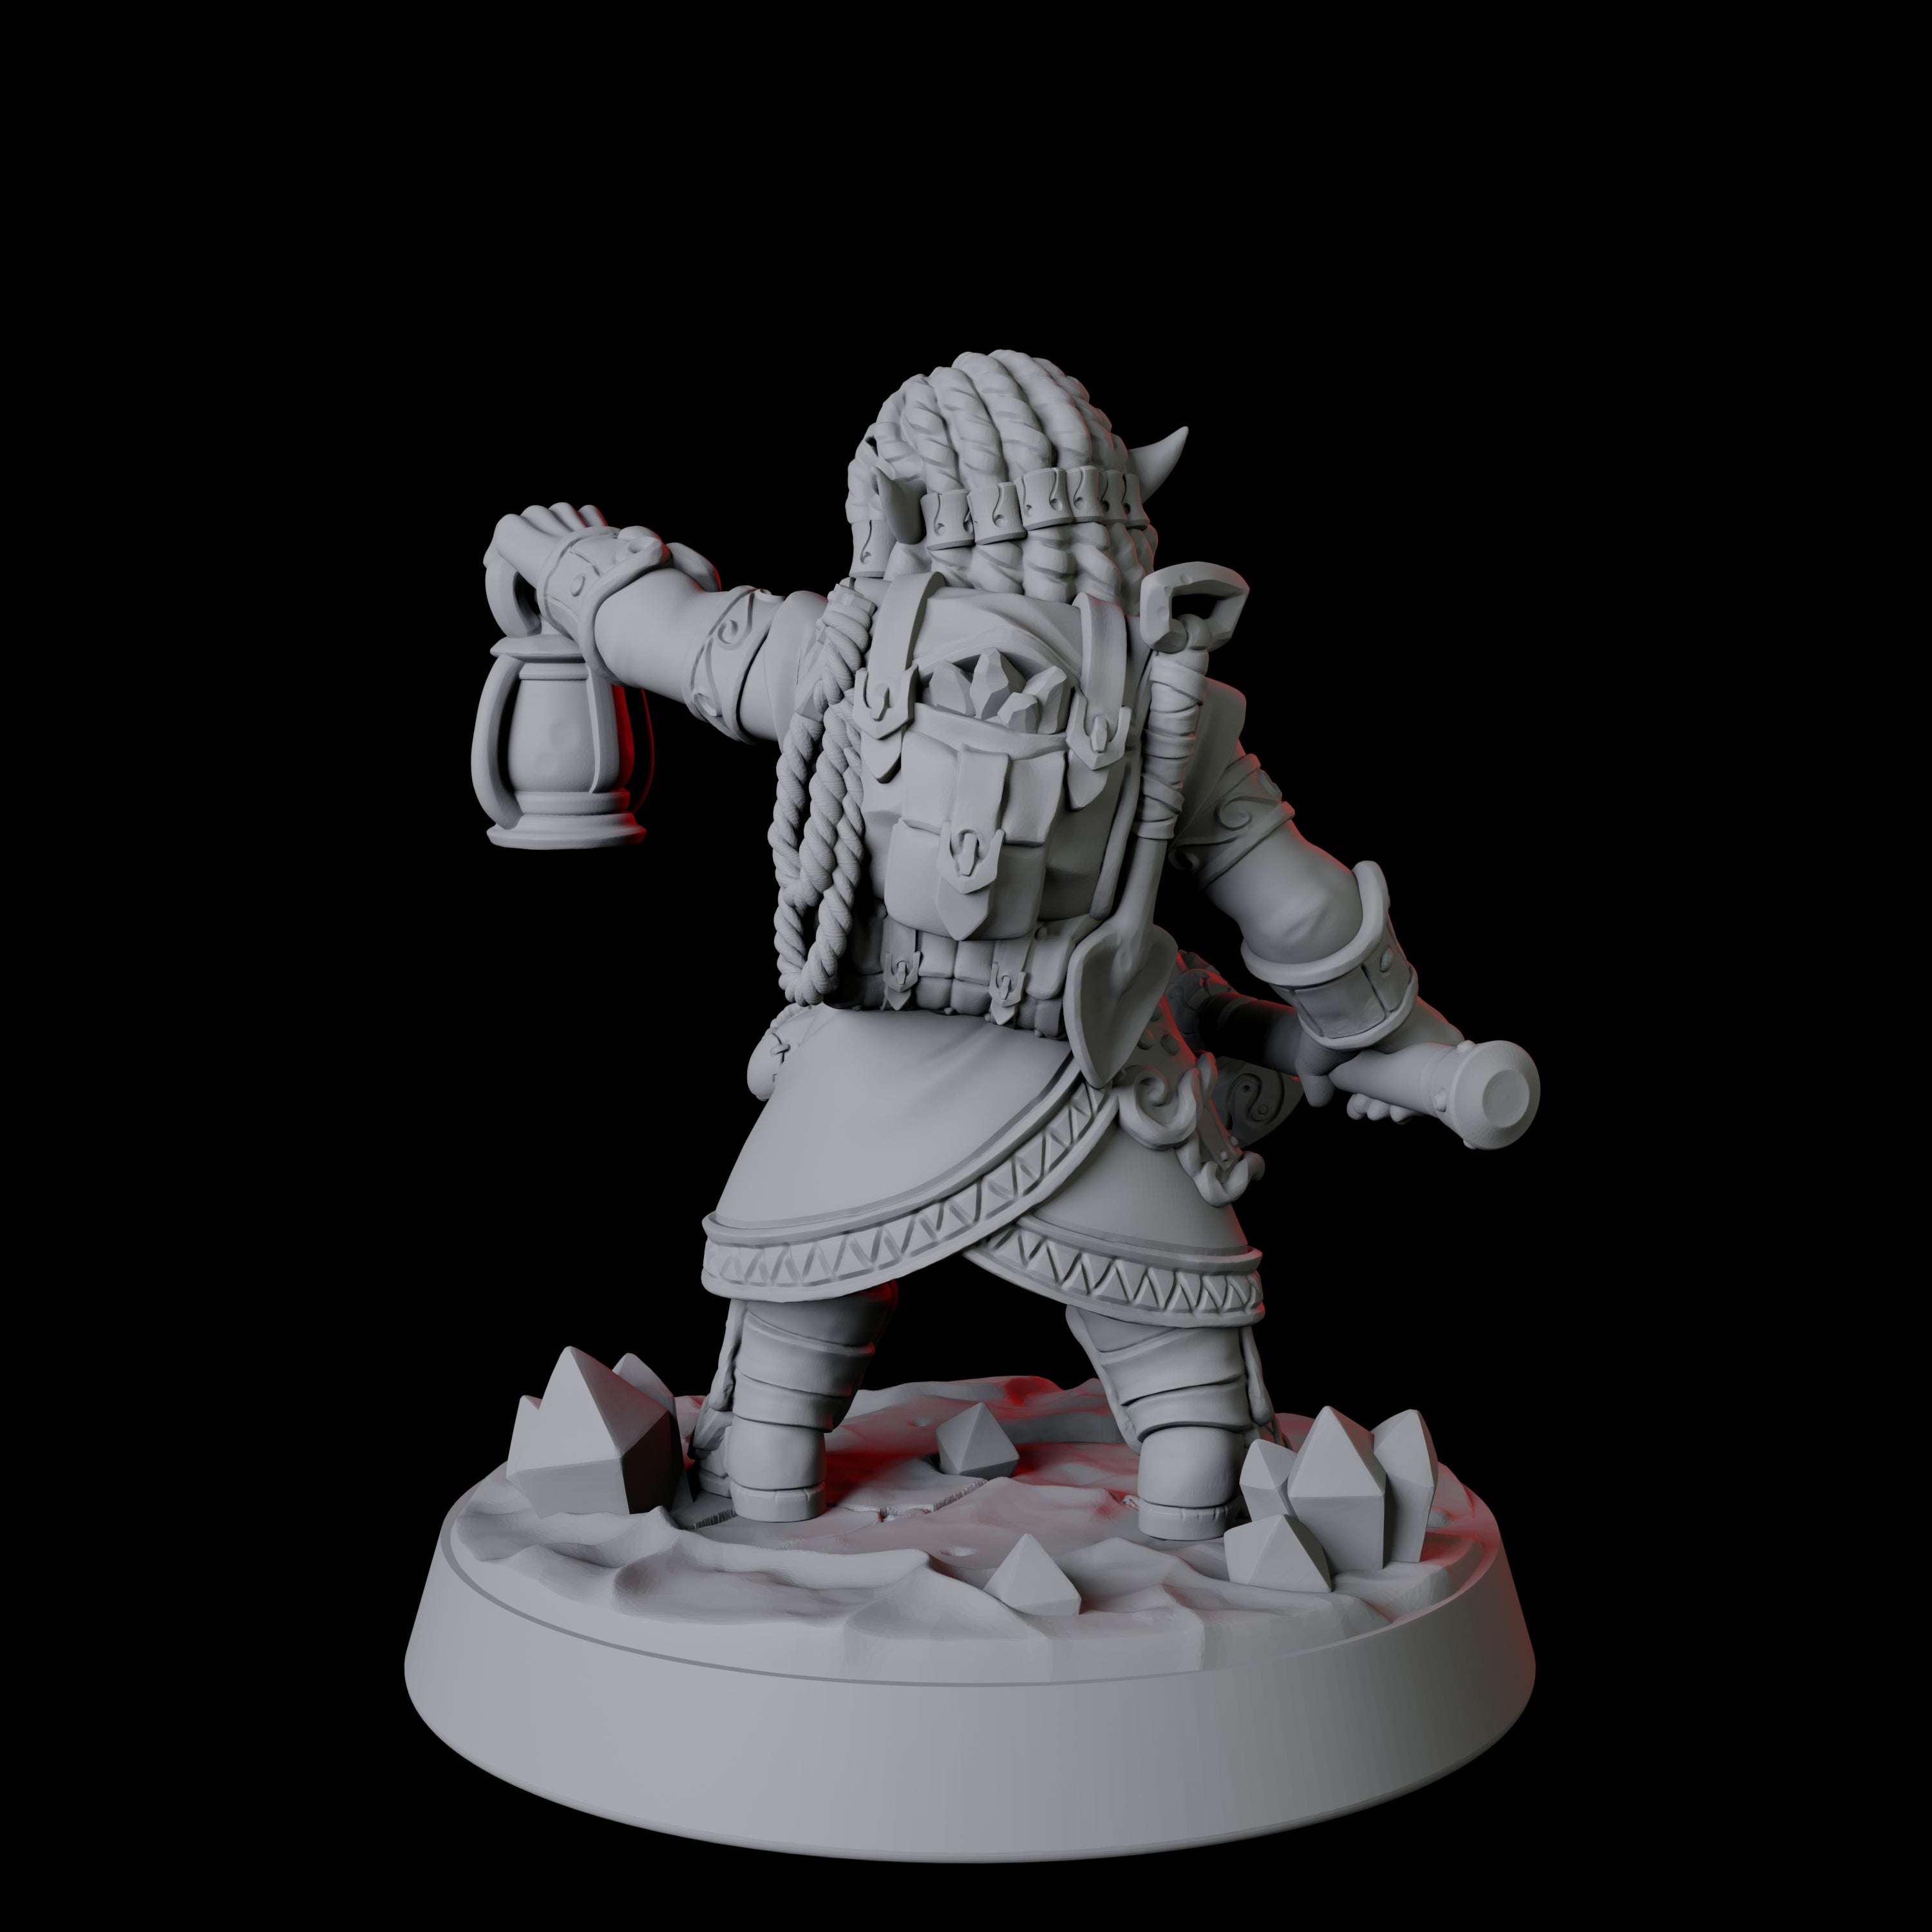 Gnome Miner D Miniature for Dungeons and Dragons, Pathfinder or other TTRPGs